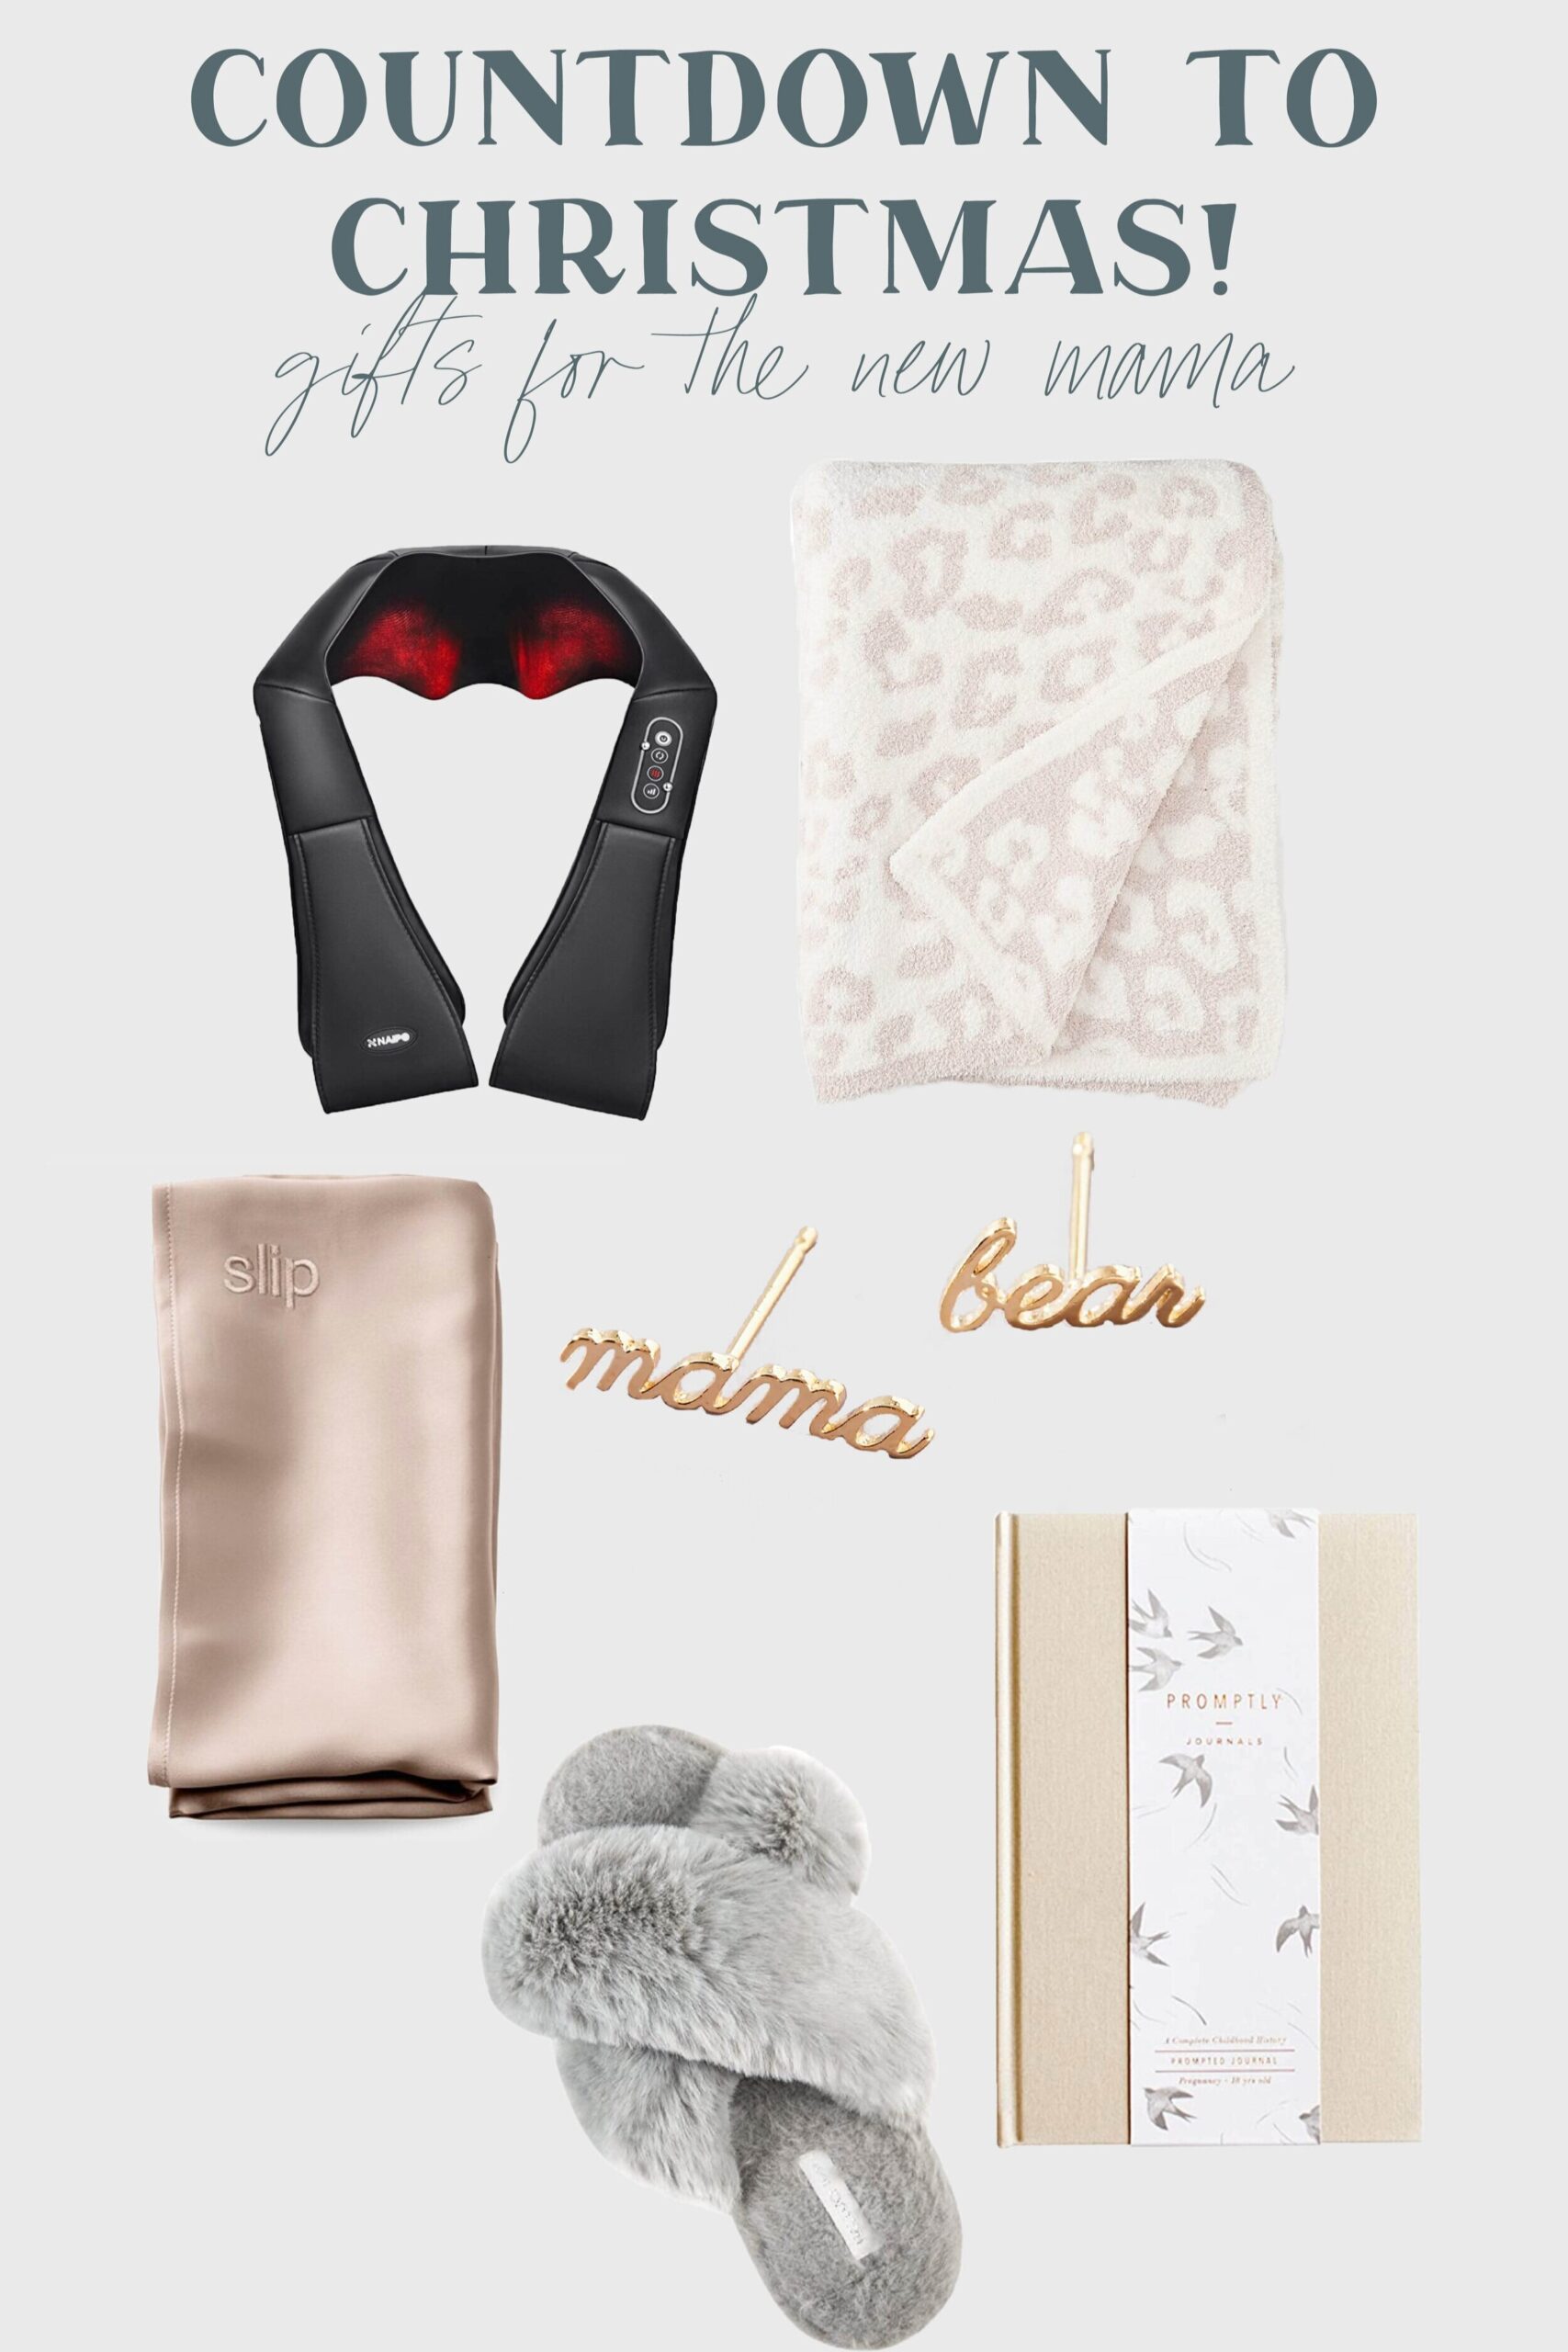 Gifts for the New Mama